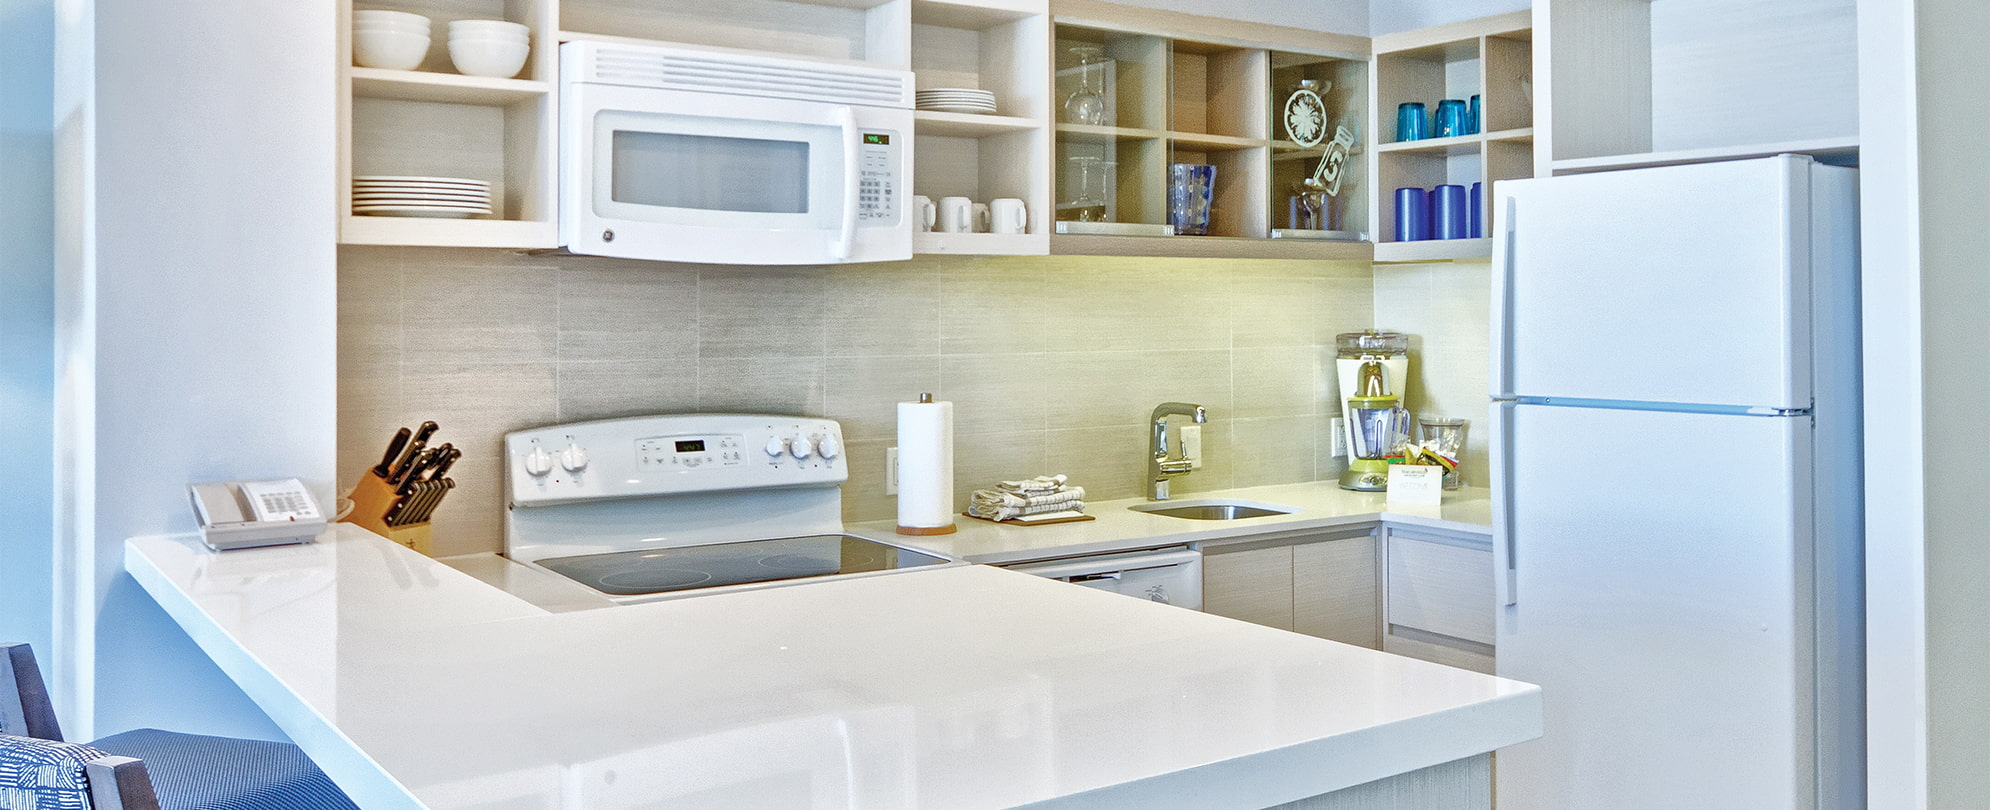 White appliances and countertops in the kitchen of a resort suite at Margaritaville Vacation Club by Wyndham - Rio Mar.